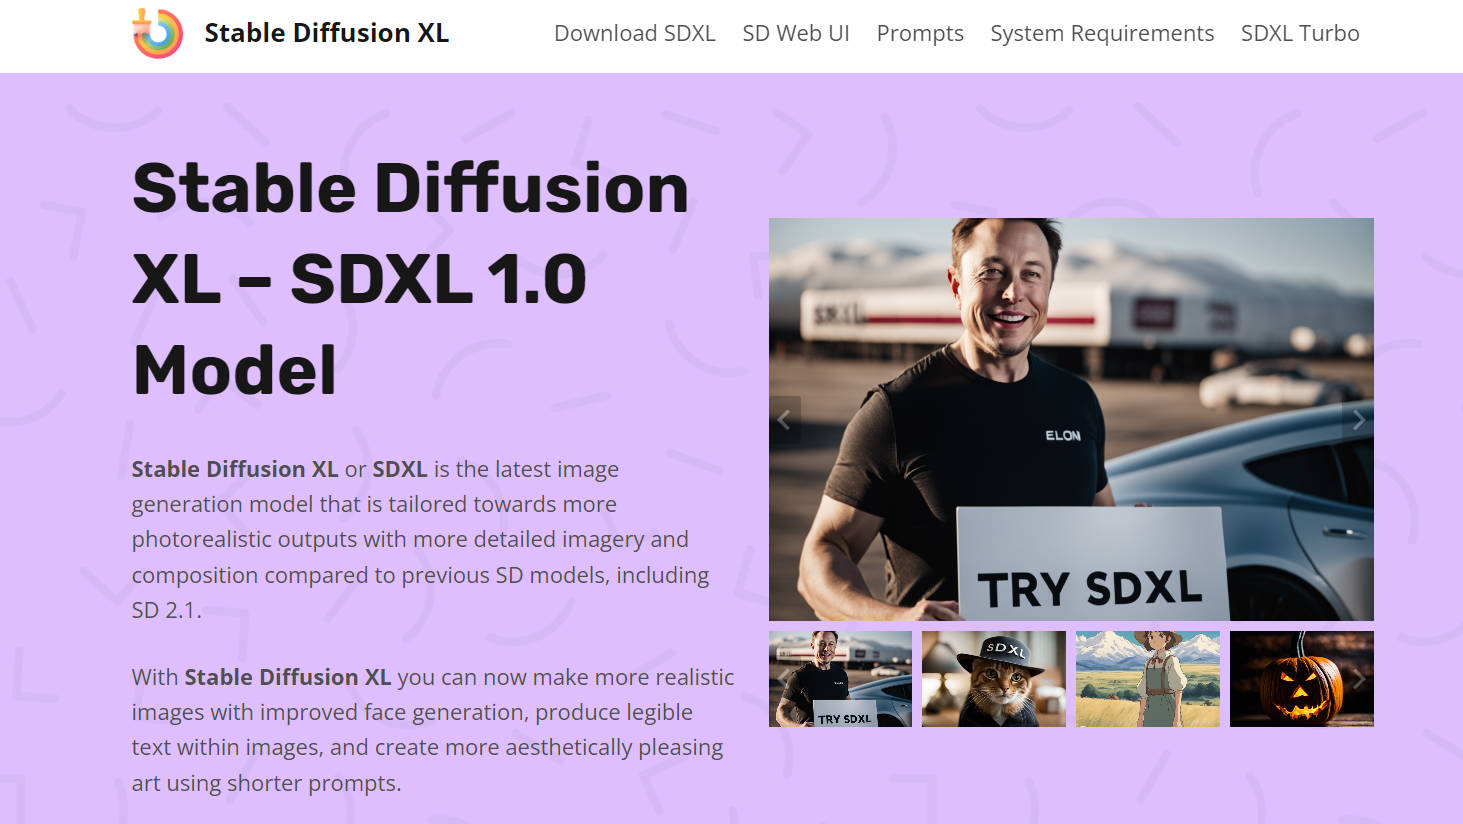 Stable Diffusion XL